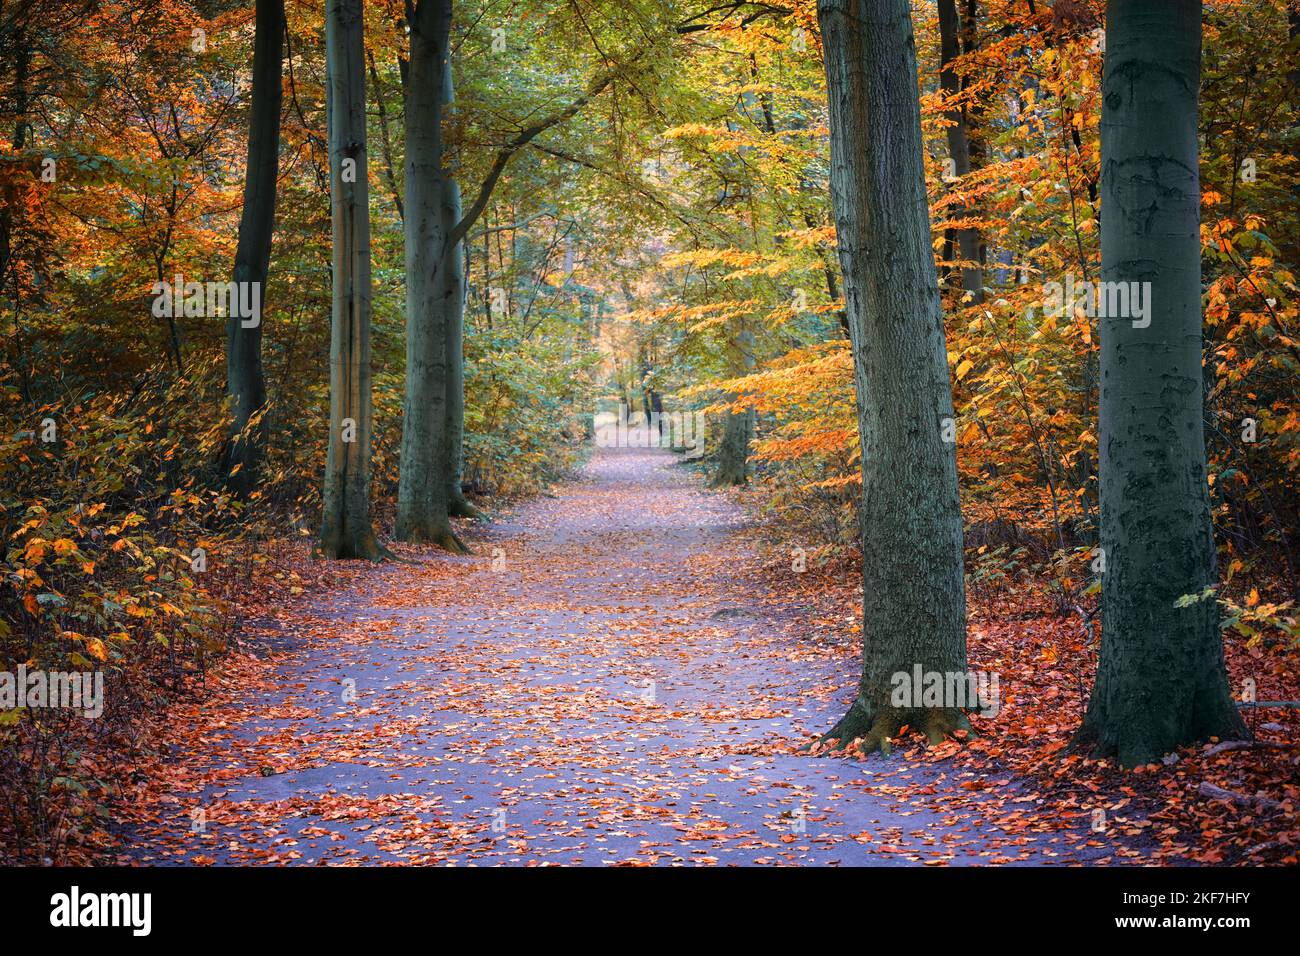 Footpath through an autumn forest with red and golden leaves, copy space, selected focus Stock Photo